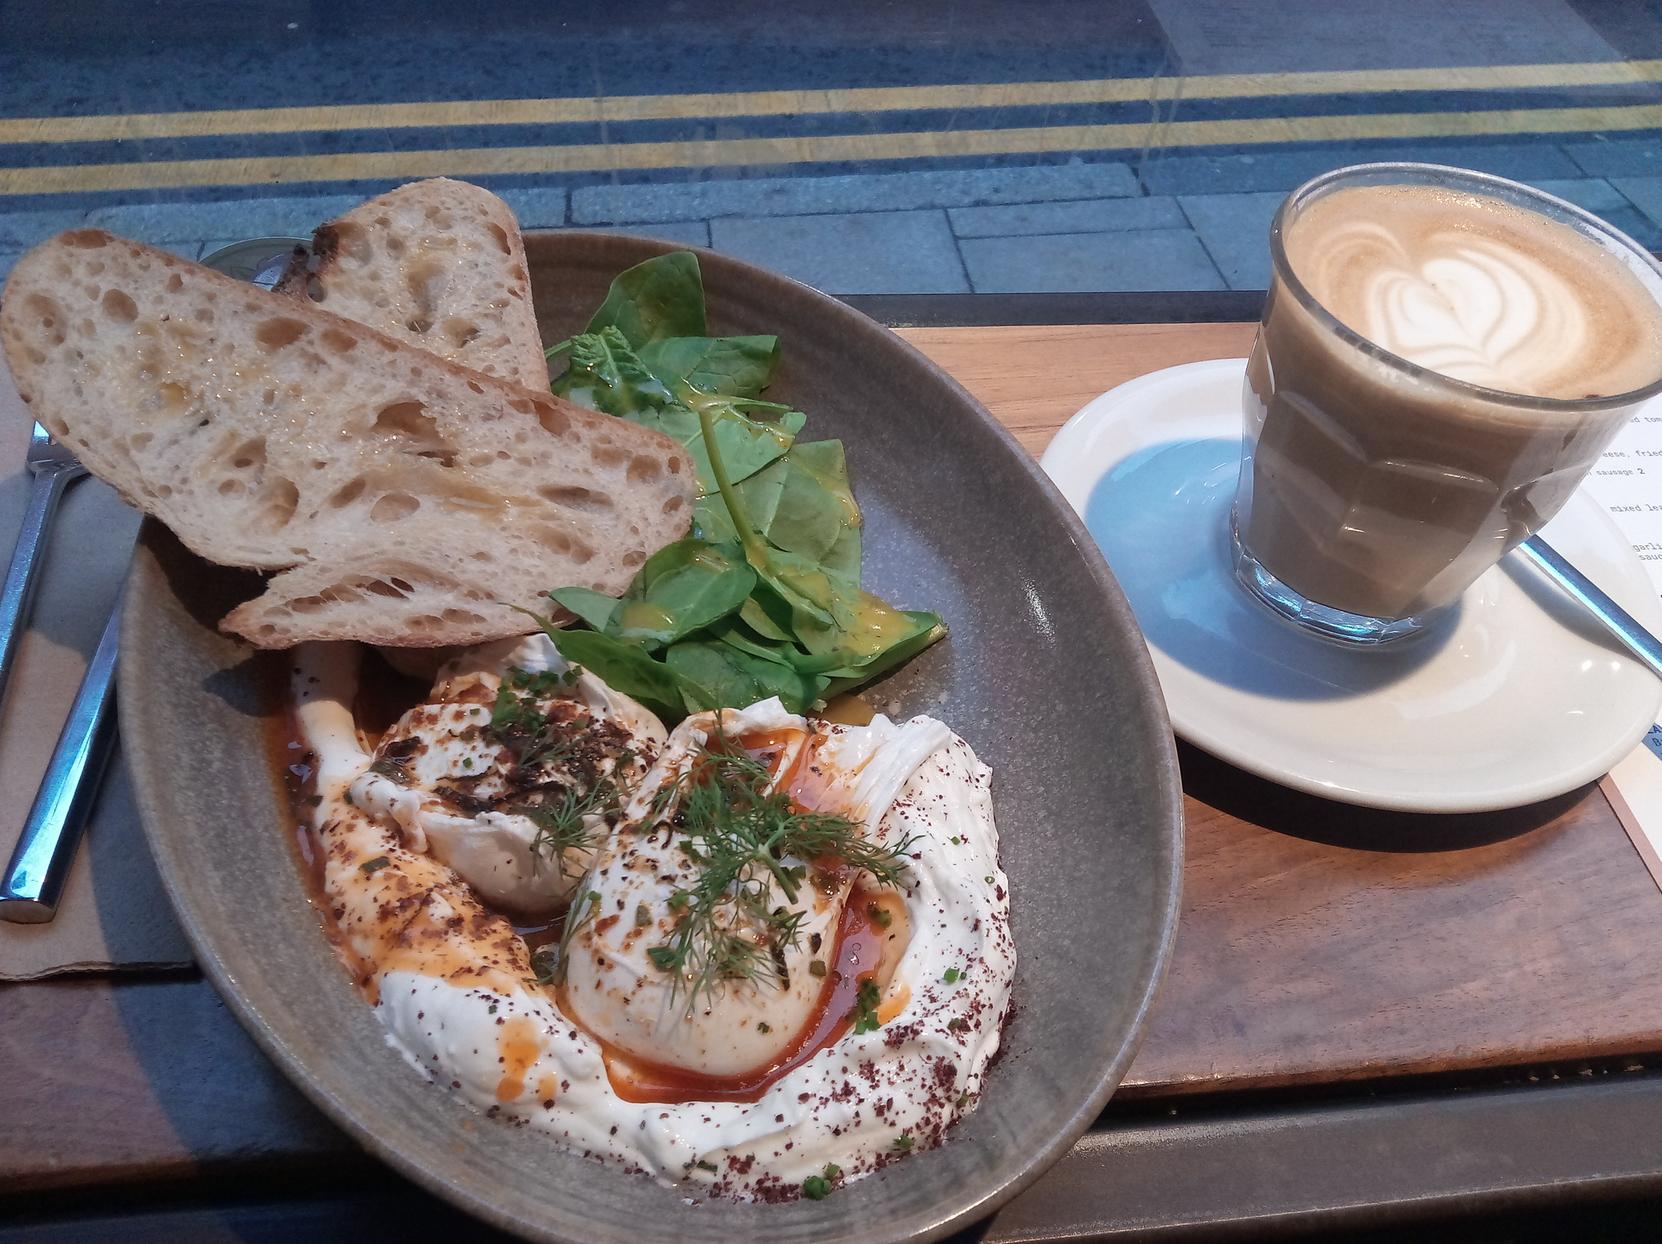 Turkish eggs and a latte at Laynes Espresso.